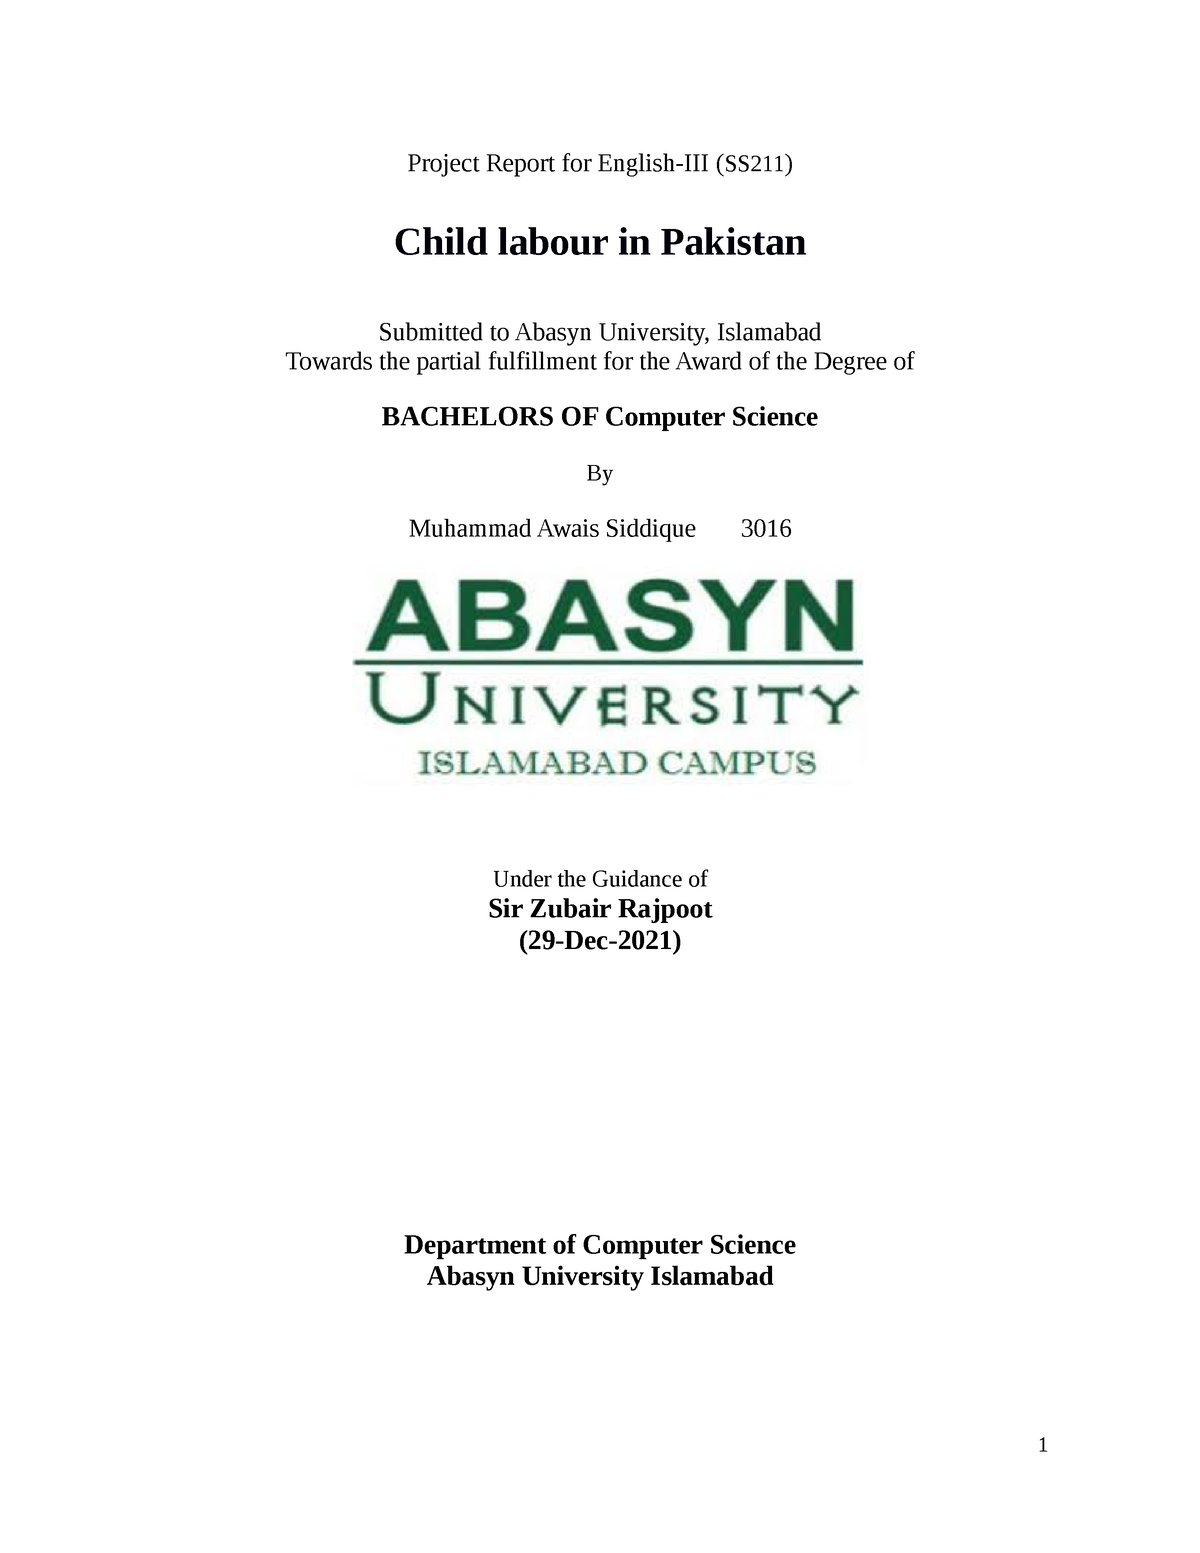 literature review of child labour in pakistan